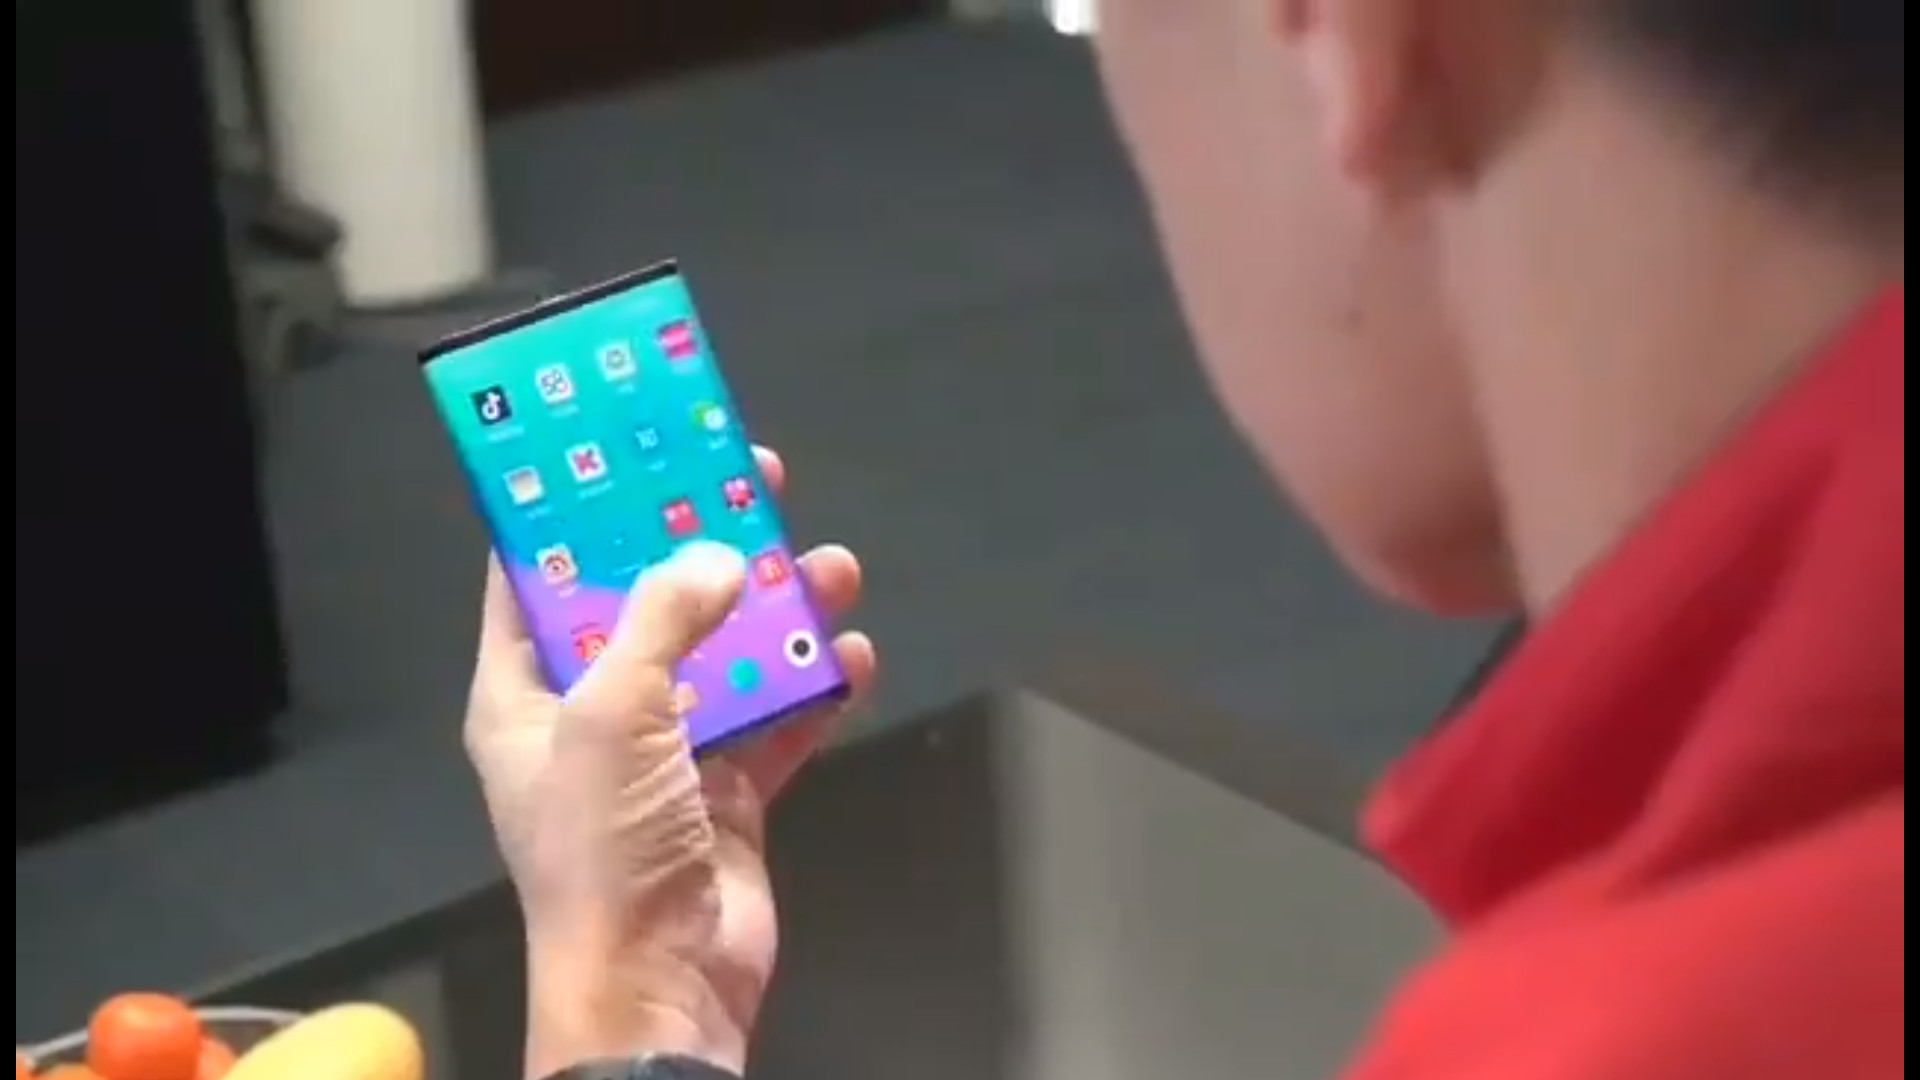 The Xiaomi foldable phone.